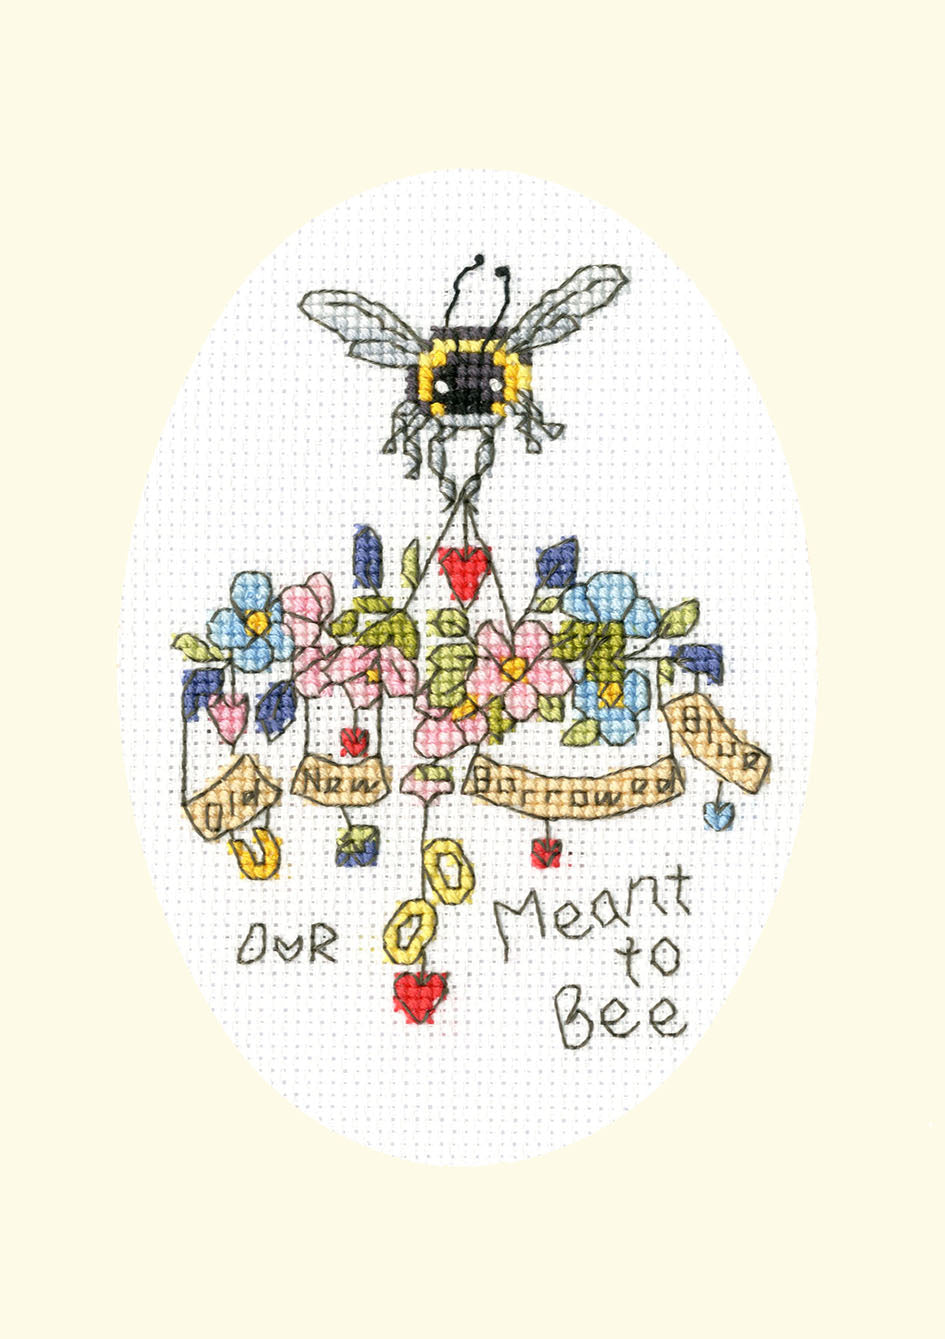 Meant to Bee - Greeting Card Cross Stitch Kit